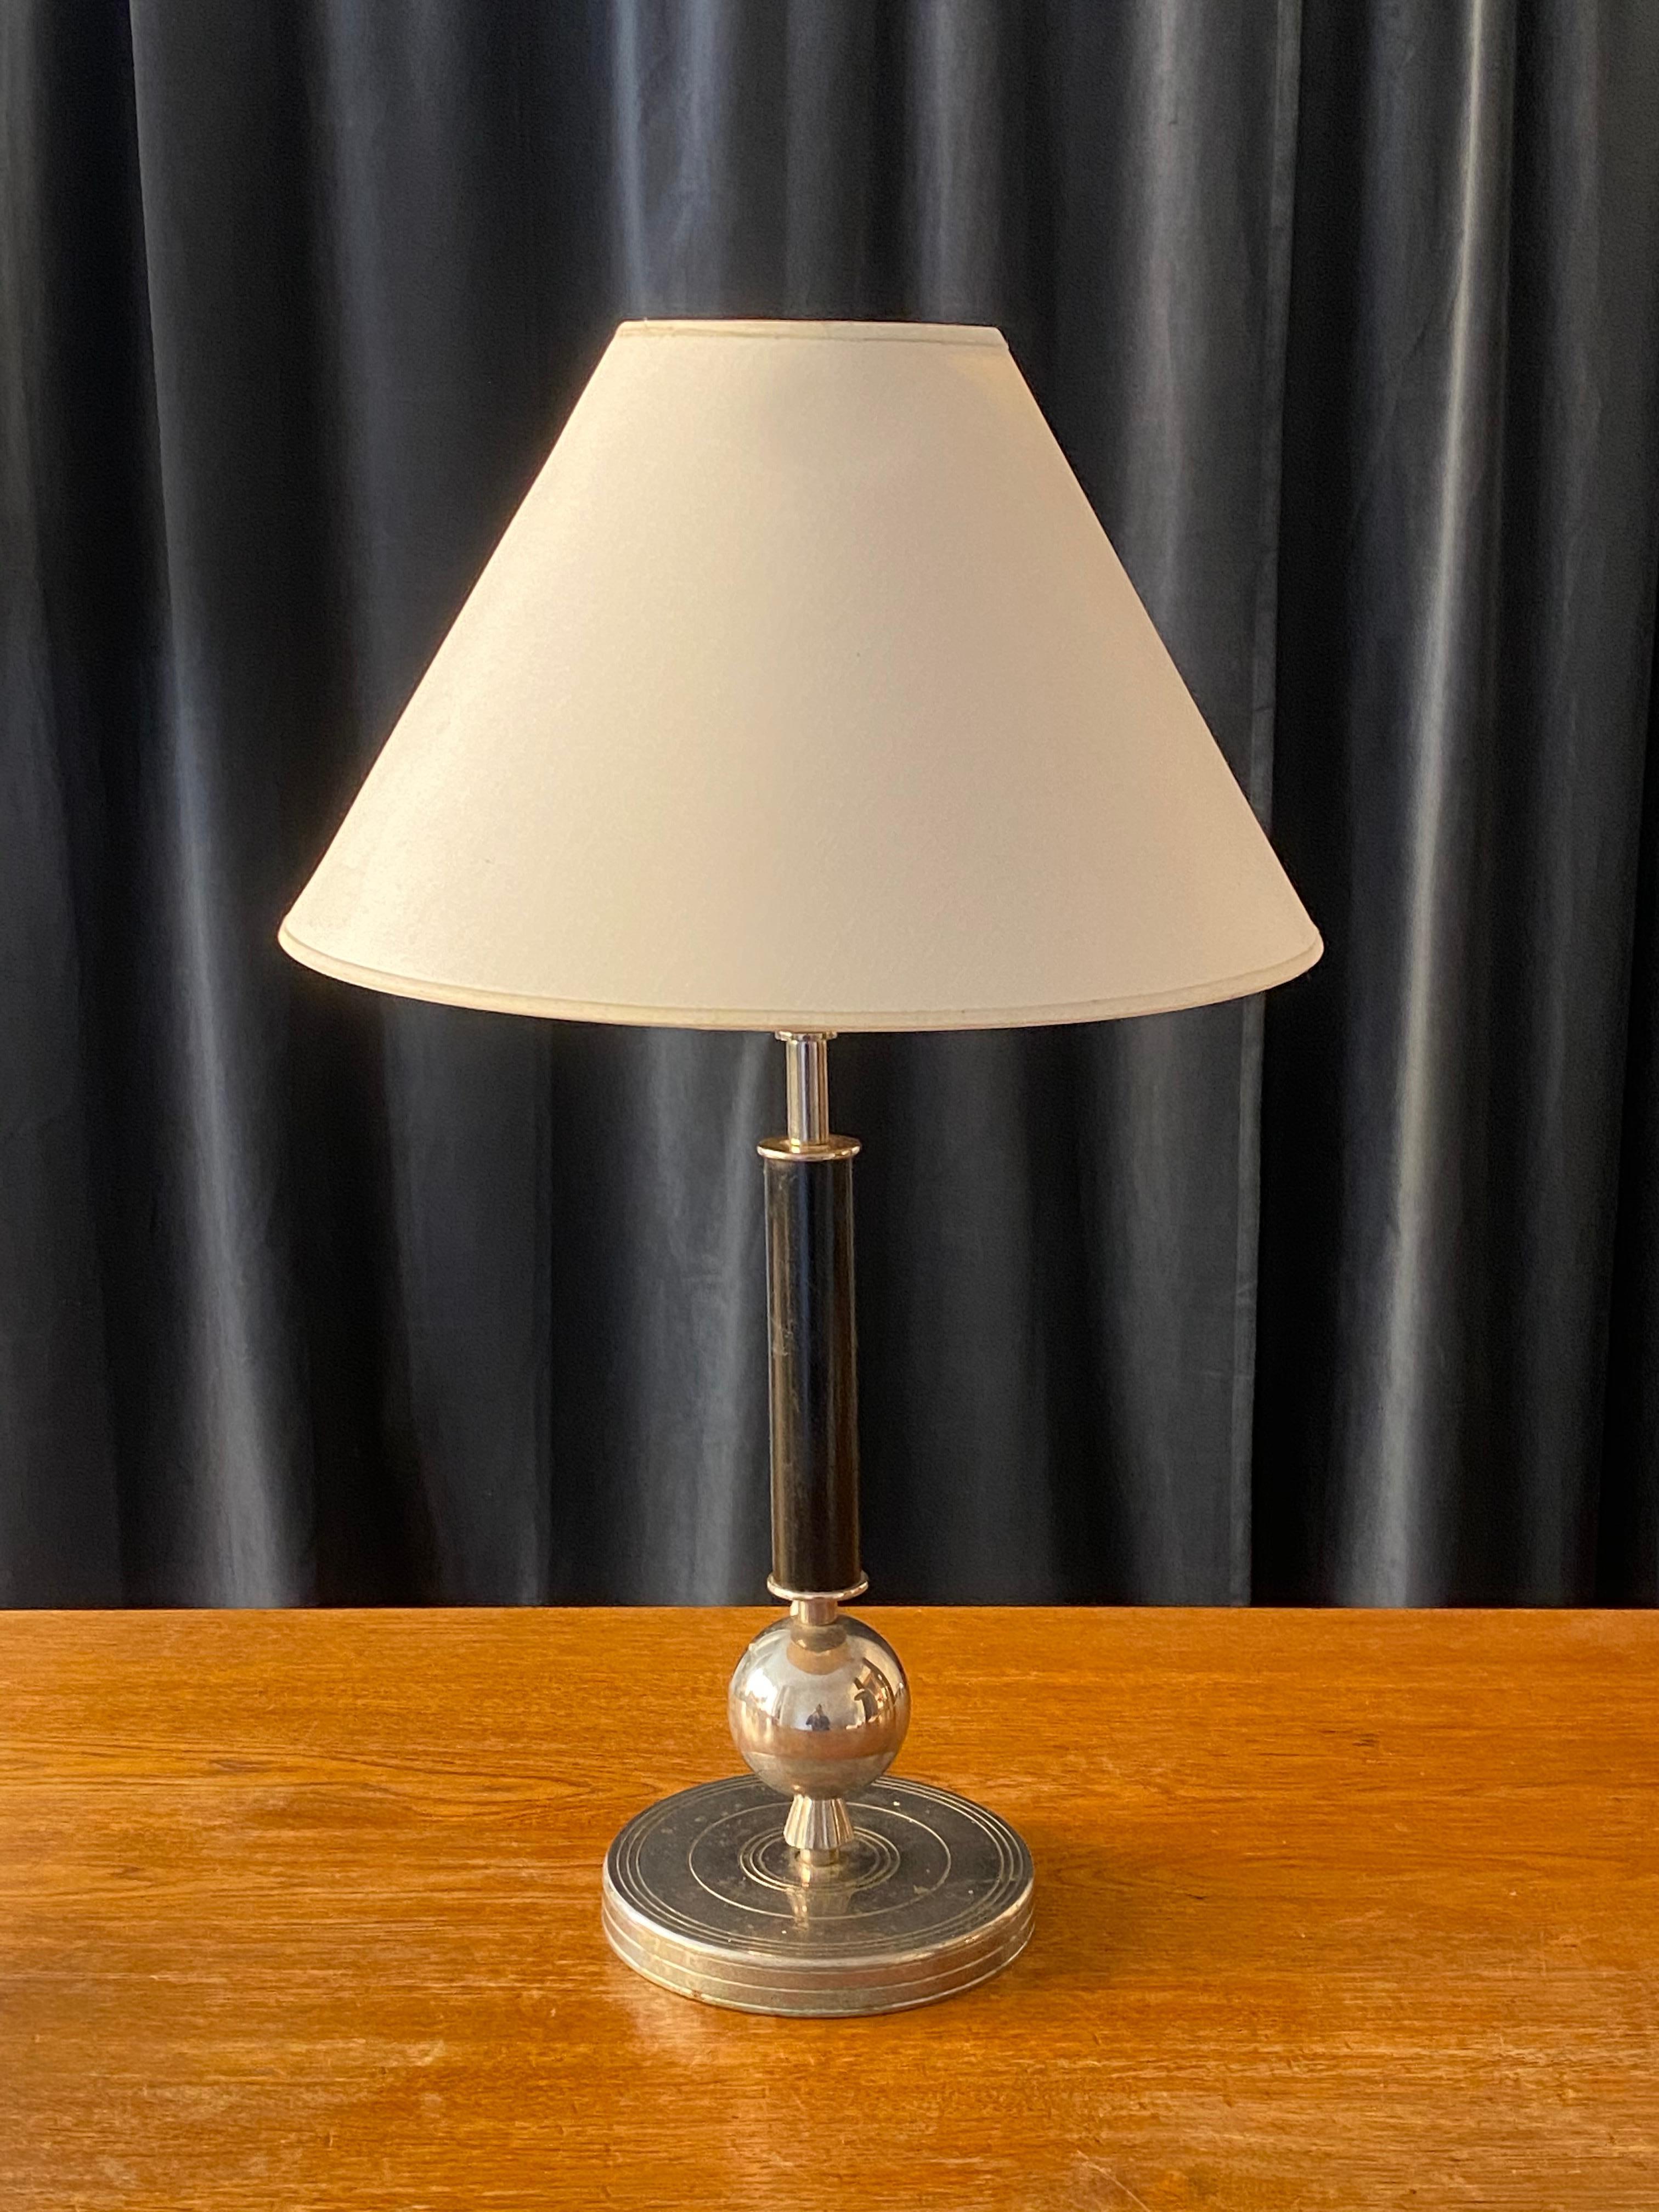 An elegant Art Deco / functionalist table lamp. By an unknown Swedish designer and producer. Base in stainless steel and original black-painted lacquer. The screen is not included.